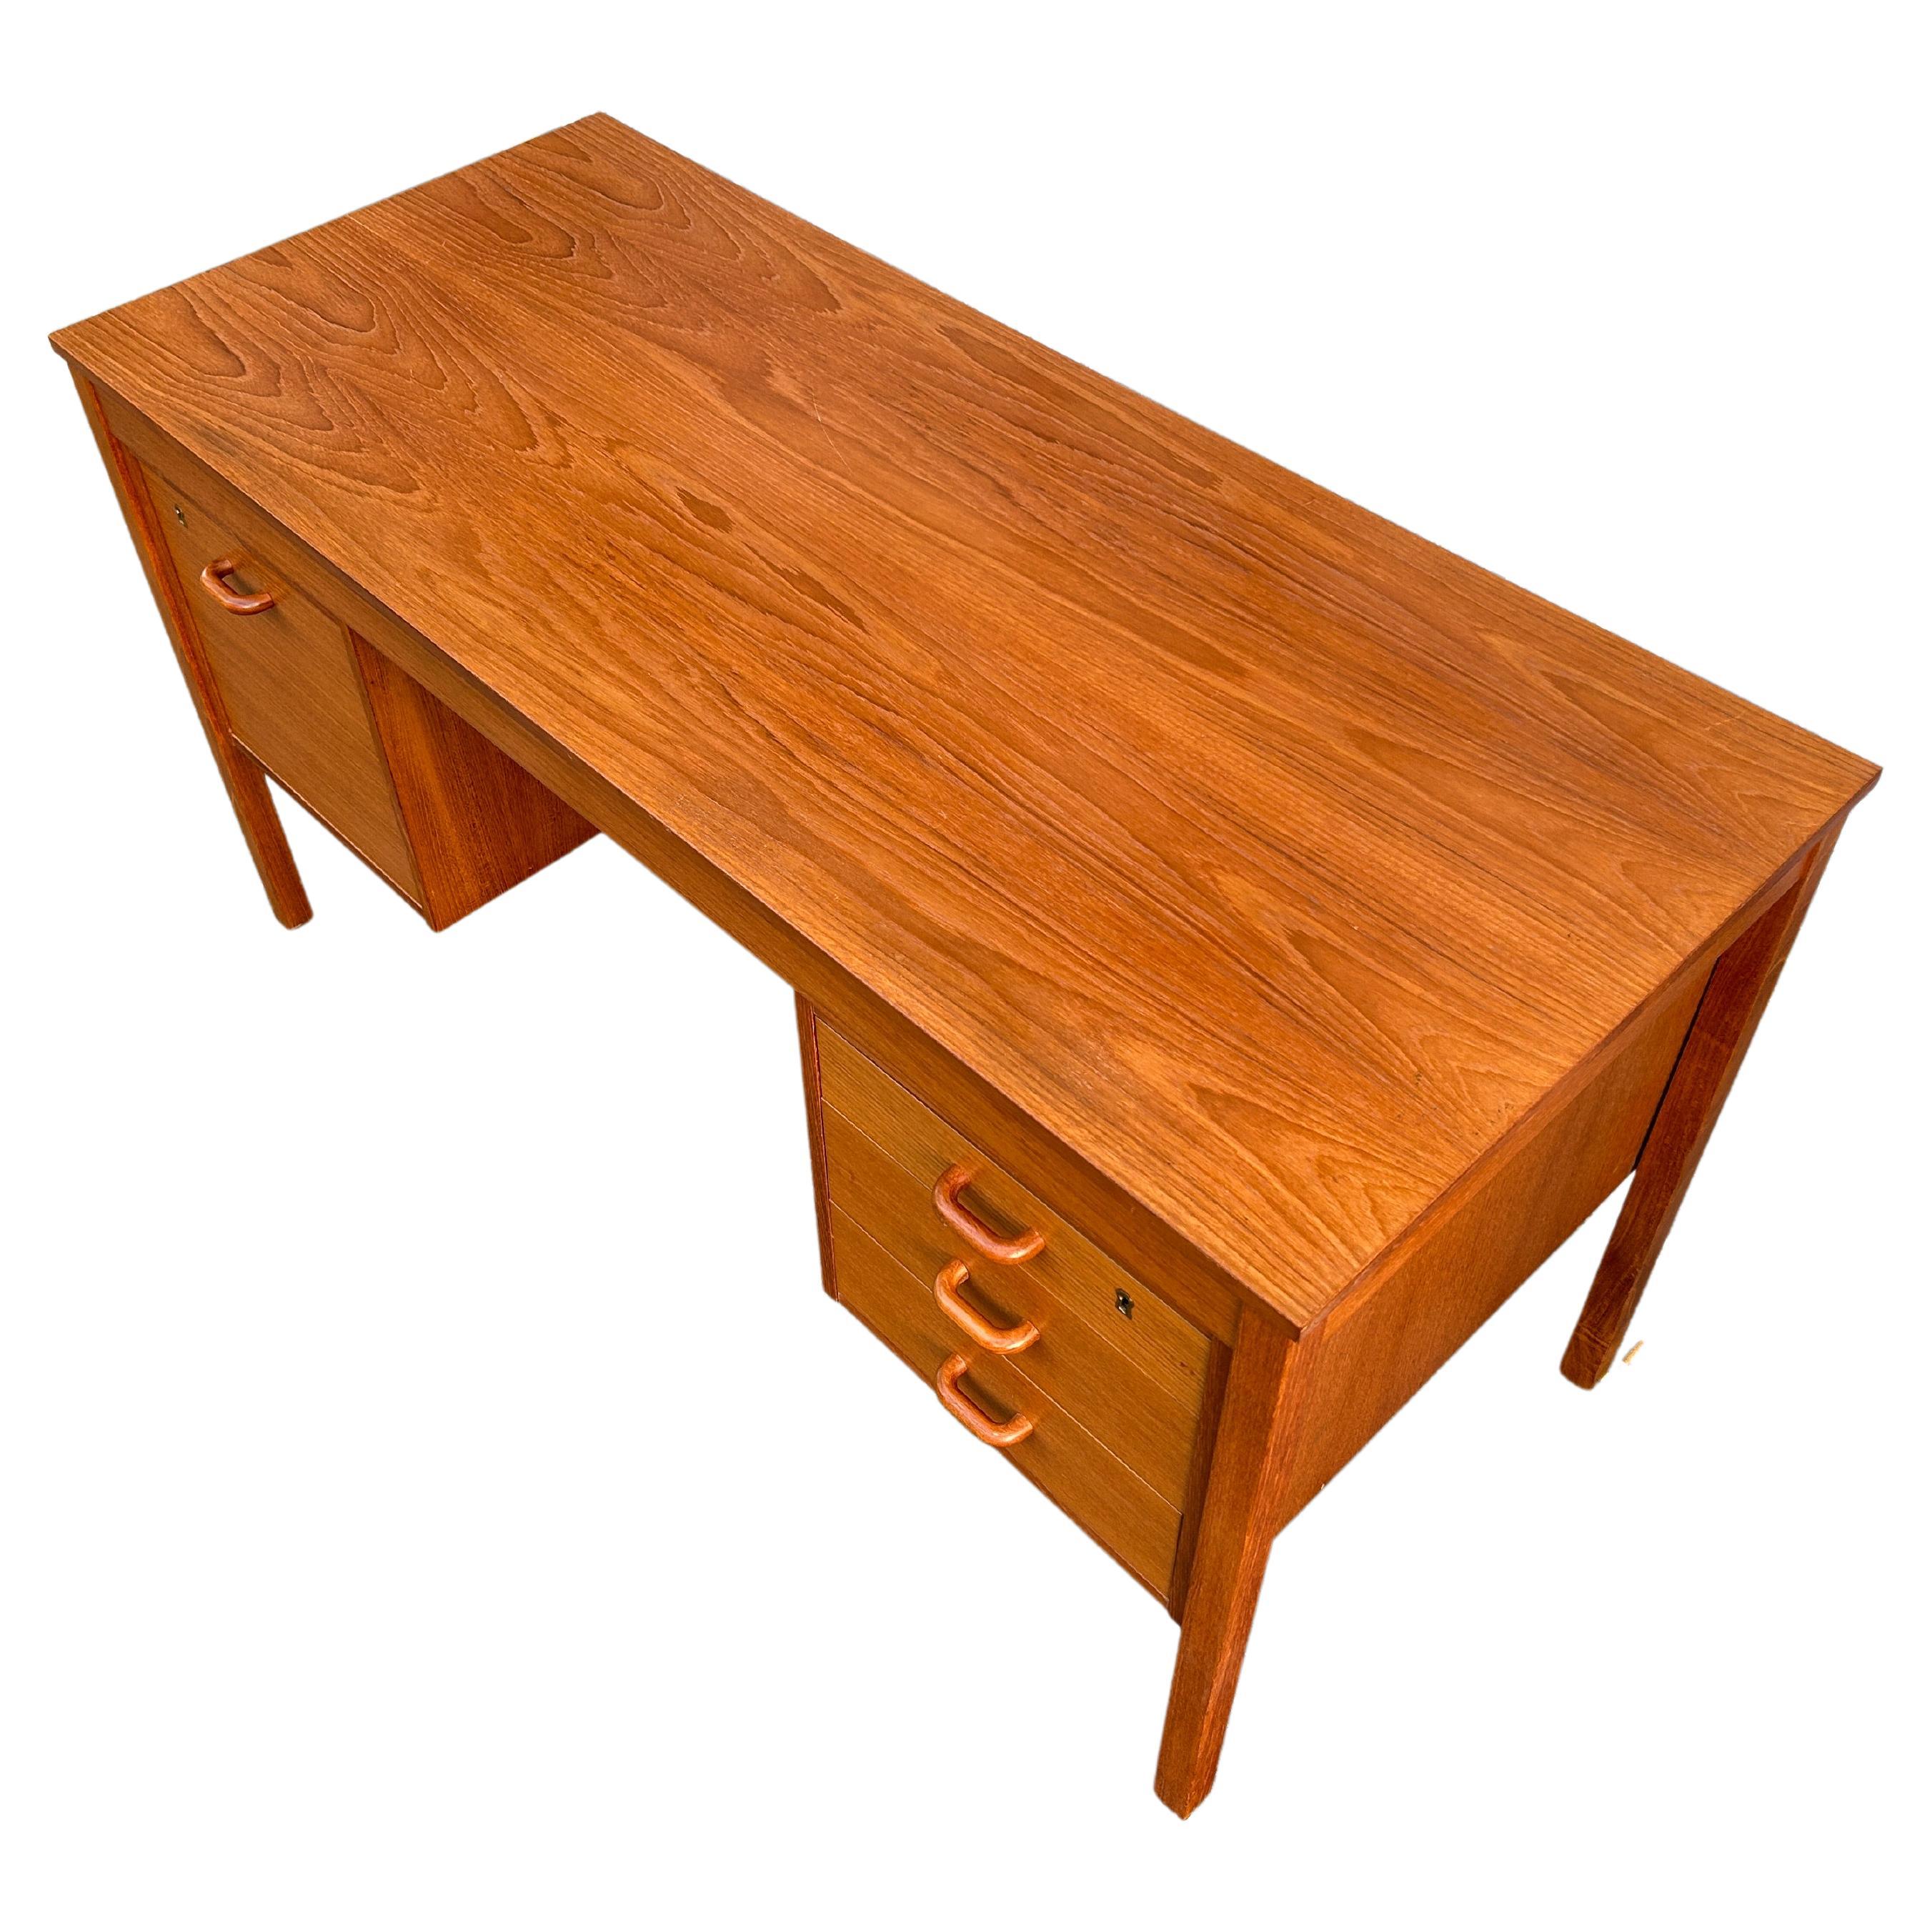 Mid century Danish modern teak knee hole 4 drawer desk with key. Beautiful wood grain on top great construction details - solid wood handles. Made in Denmark.

Dimensions: H: 28.5 inches: W: 53 inches: D: 23 inches.